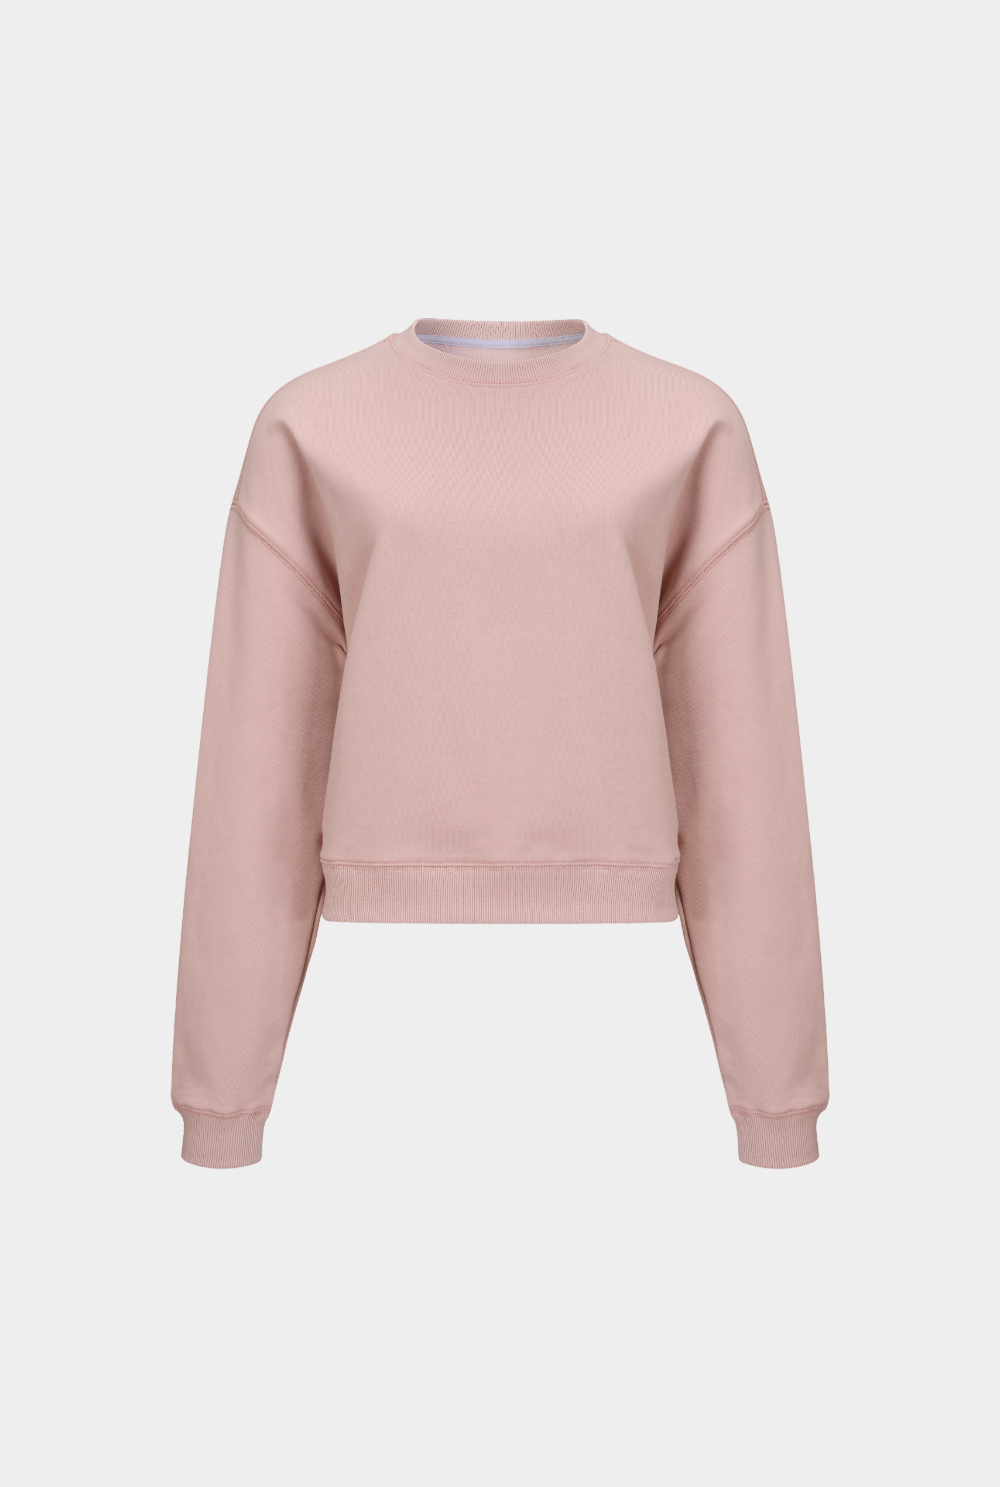 long sleeved tee baby pink color image-S1L3